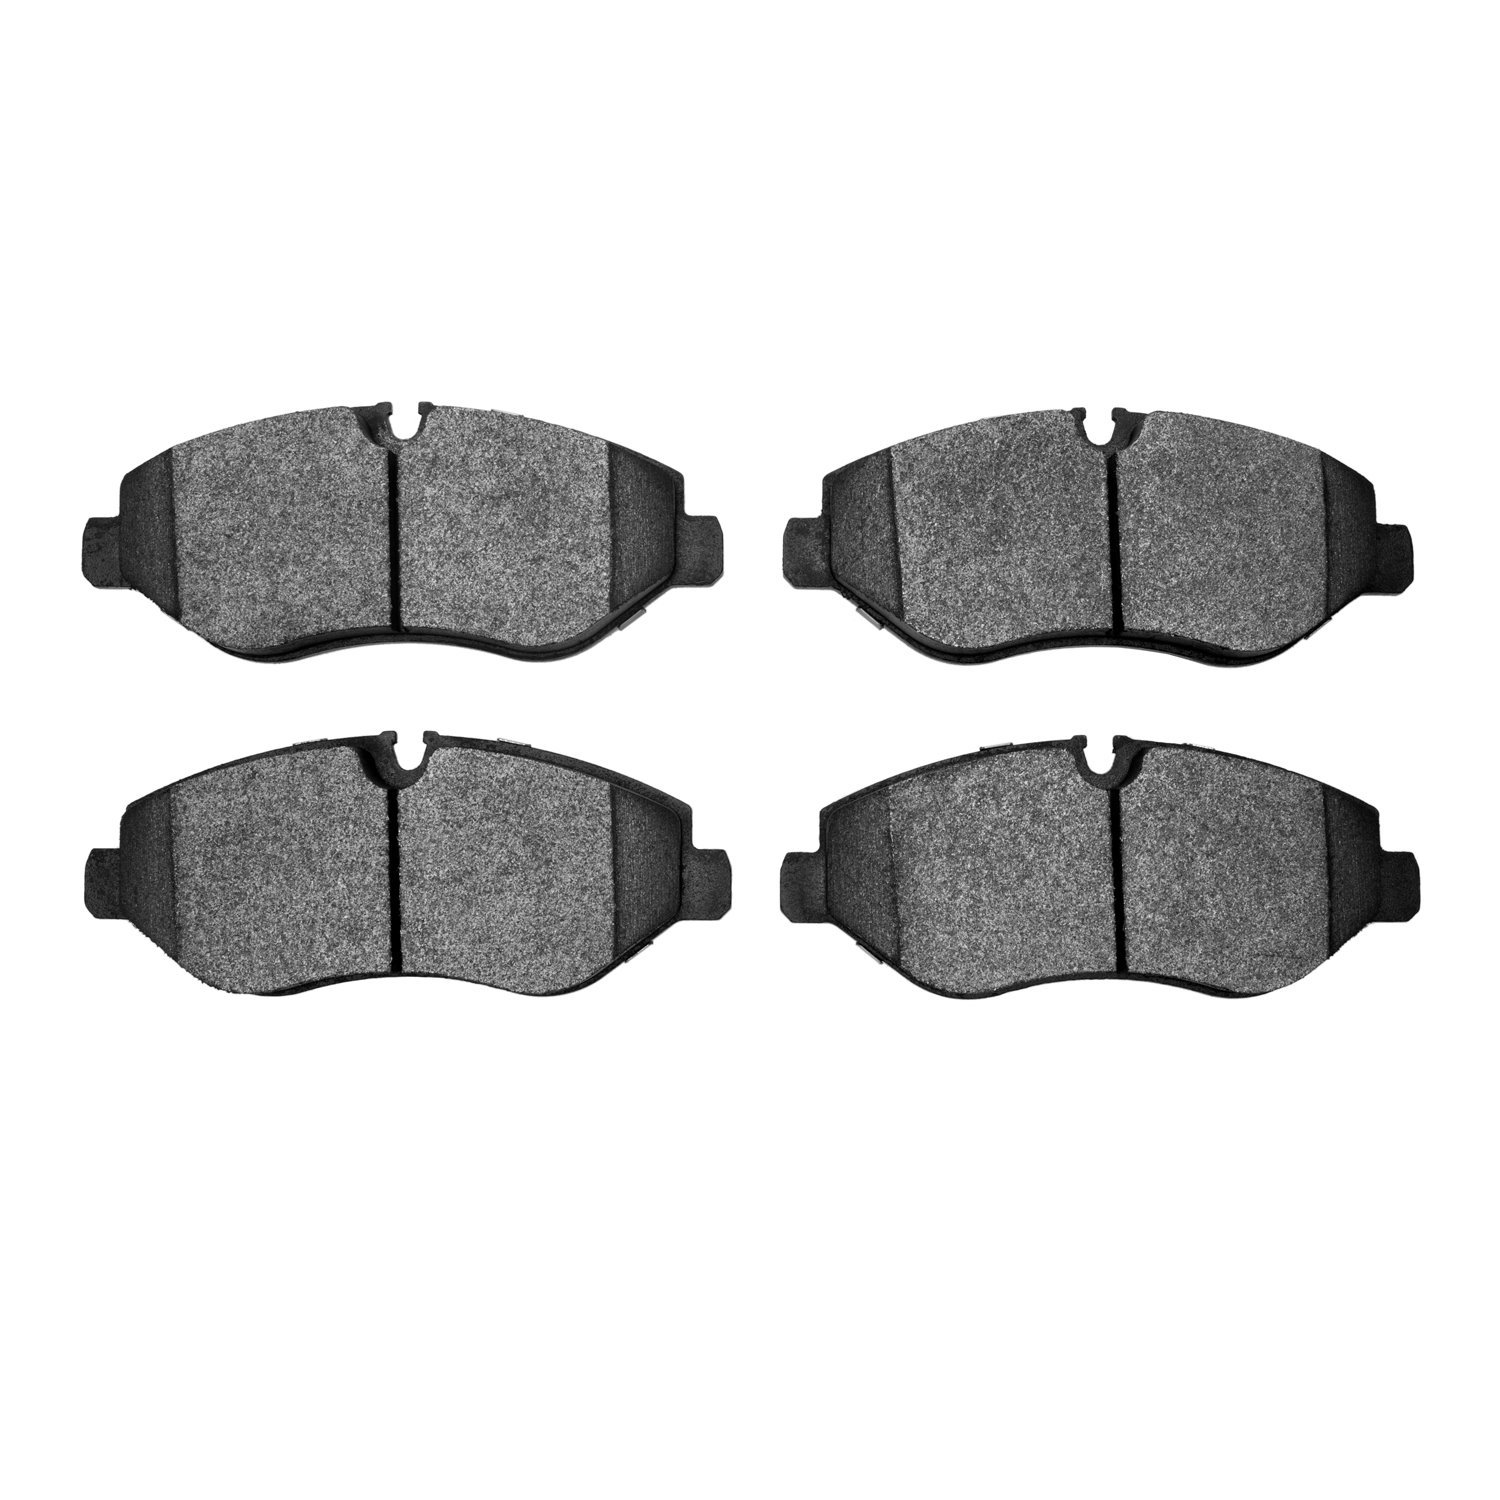 1214-1316-00 Heavy-Duty Semi-Metallic Brake Pads, Fits Select Multiple Makes/Models, Position: Fr,Front